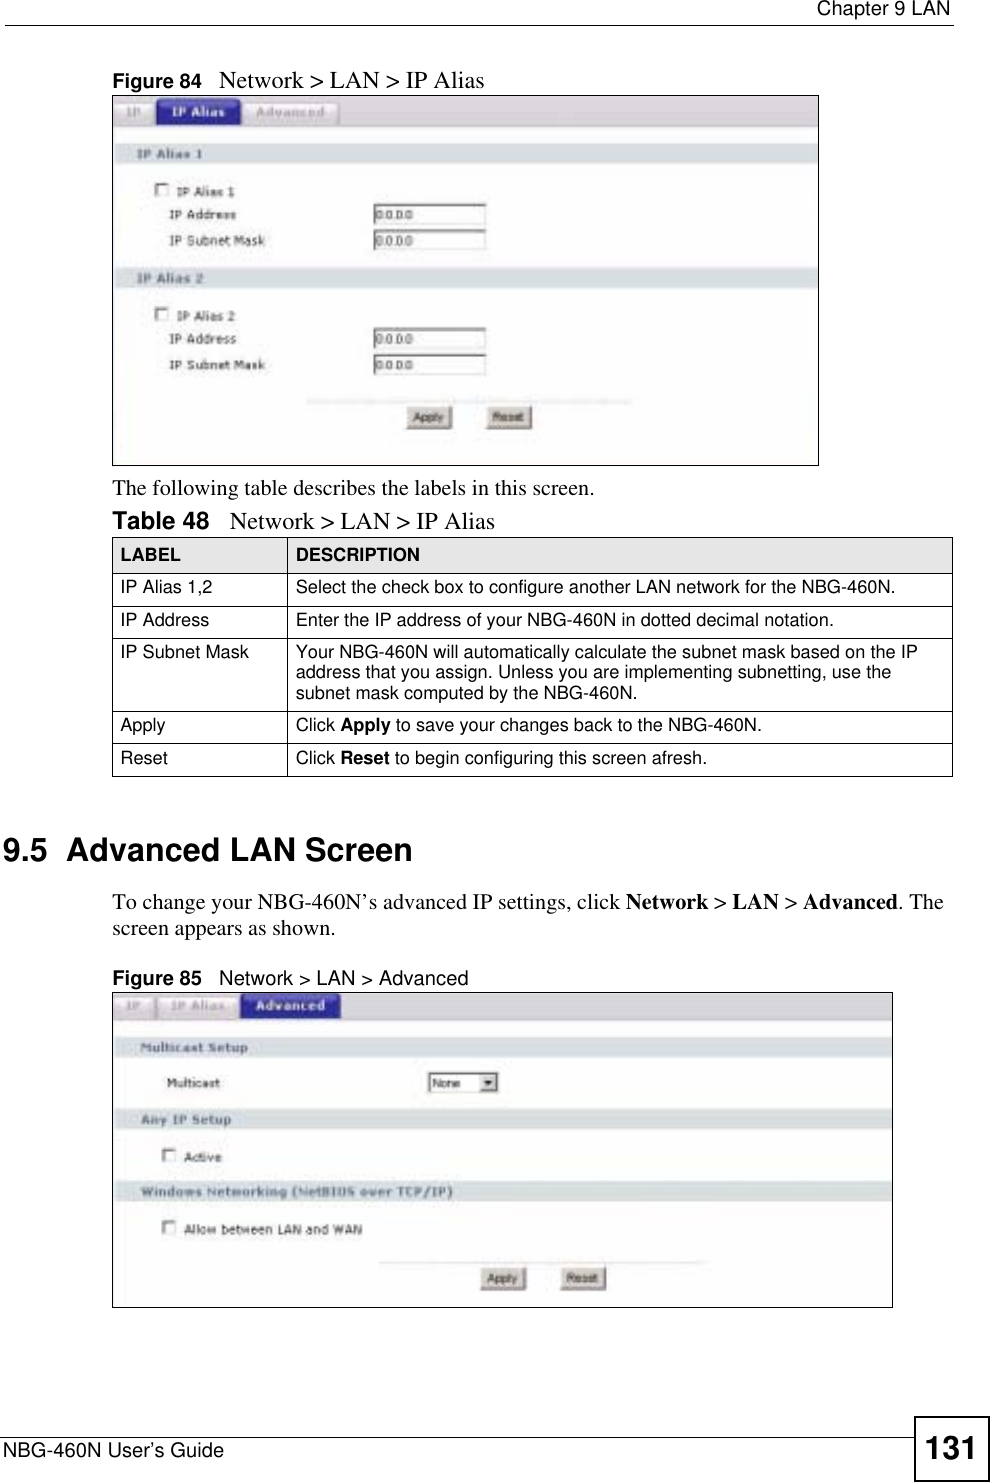  Chapter 9 LANNBG-460N User’s Guide 131Figure 84   Network &gt; LAN &gt; IP AliasThe following table describes the labels in this screen.9.5  Advanced LAN ScreenTo change your NBG-460N’s advanced IP settings, click Network &gt; LAN &gt; Advanced. The screen appears as shown.Figure 85   Network &gt; LAN &gt; Advanced   Table 48 Network &gt; LAN &gt; IP AliasLABEL DESCRIPTIONIP Alias 1,2 Select the check box to configure another LAN network for the NBG-460N.IP Address Enter the IP address of your NBG-460N in dotted decimal notation. IP Subnet Mask Your NBG-460N will automatically calculate the subnet mask based on the IP address that you assign. Unless you are implementing subnetting, use the subnet mask computed by the NBG-460N.Apply Click Apply to save your changes back to the NBG-460N.Reset Click Reset to begin configuring this screen afresh.